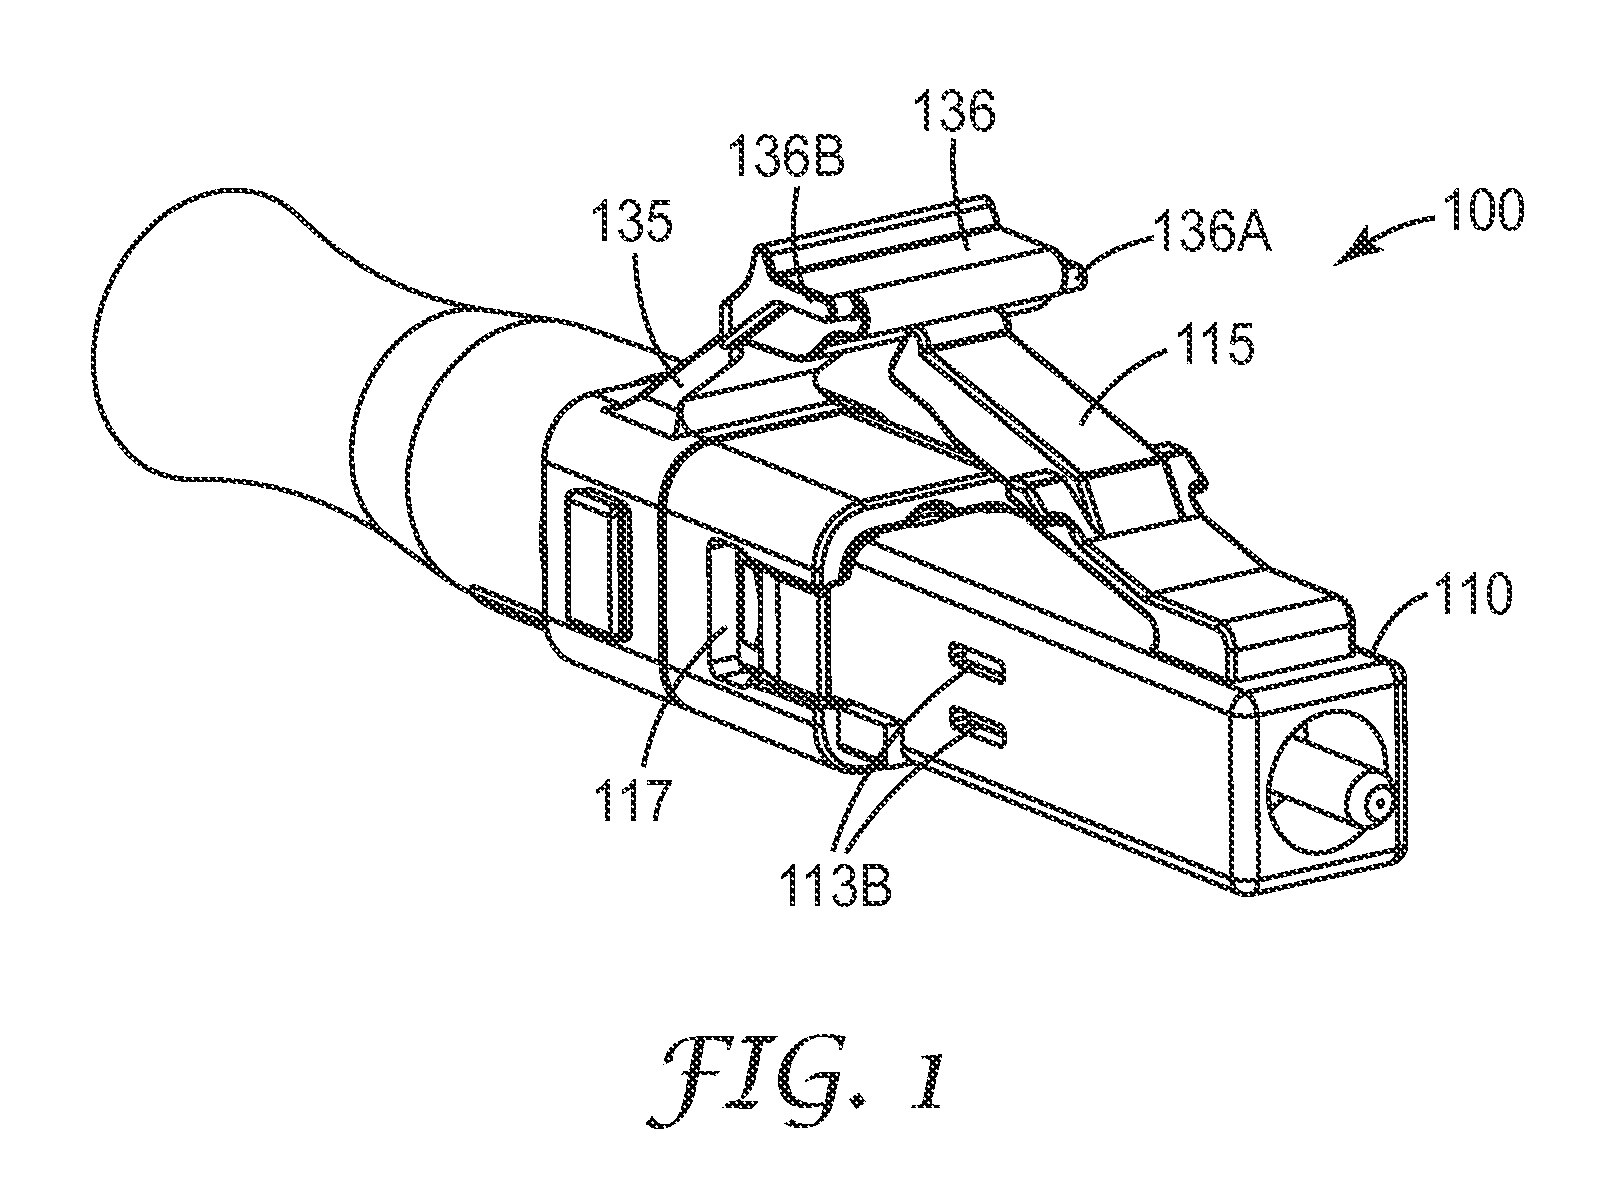 Field terminable lc format optical connector with splice element